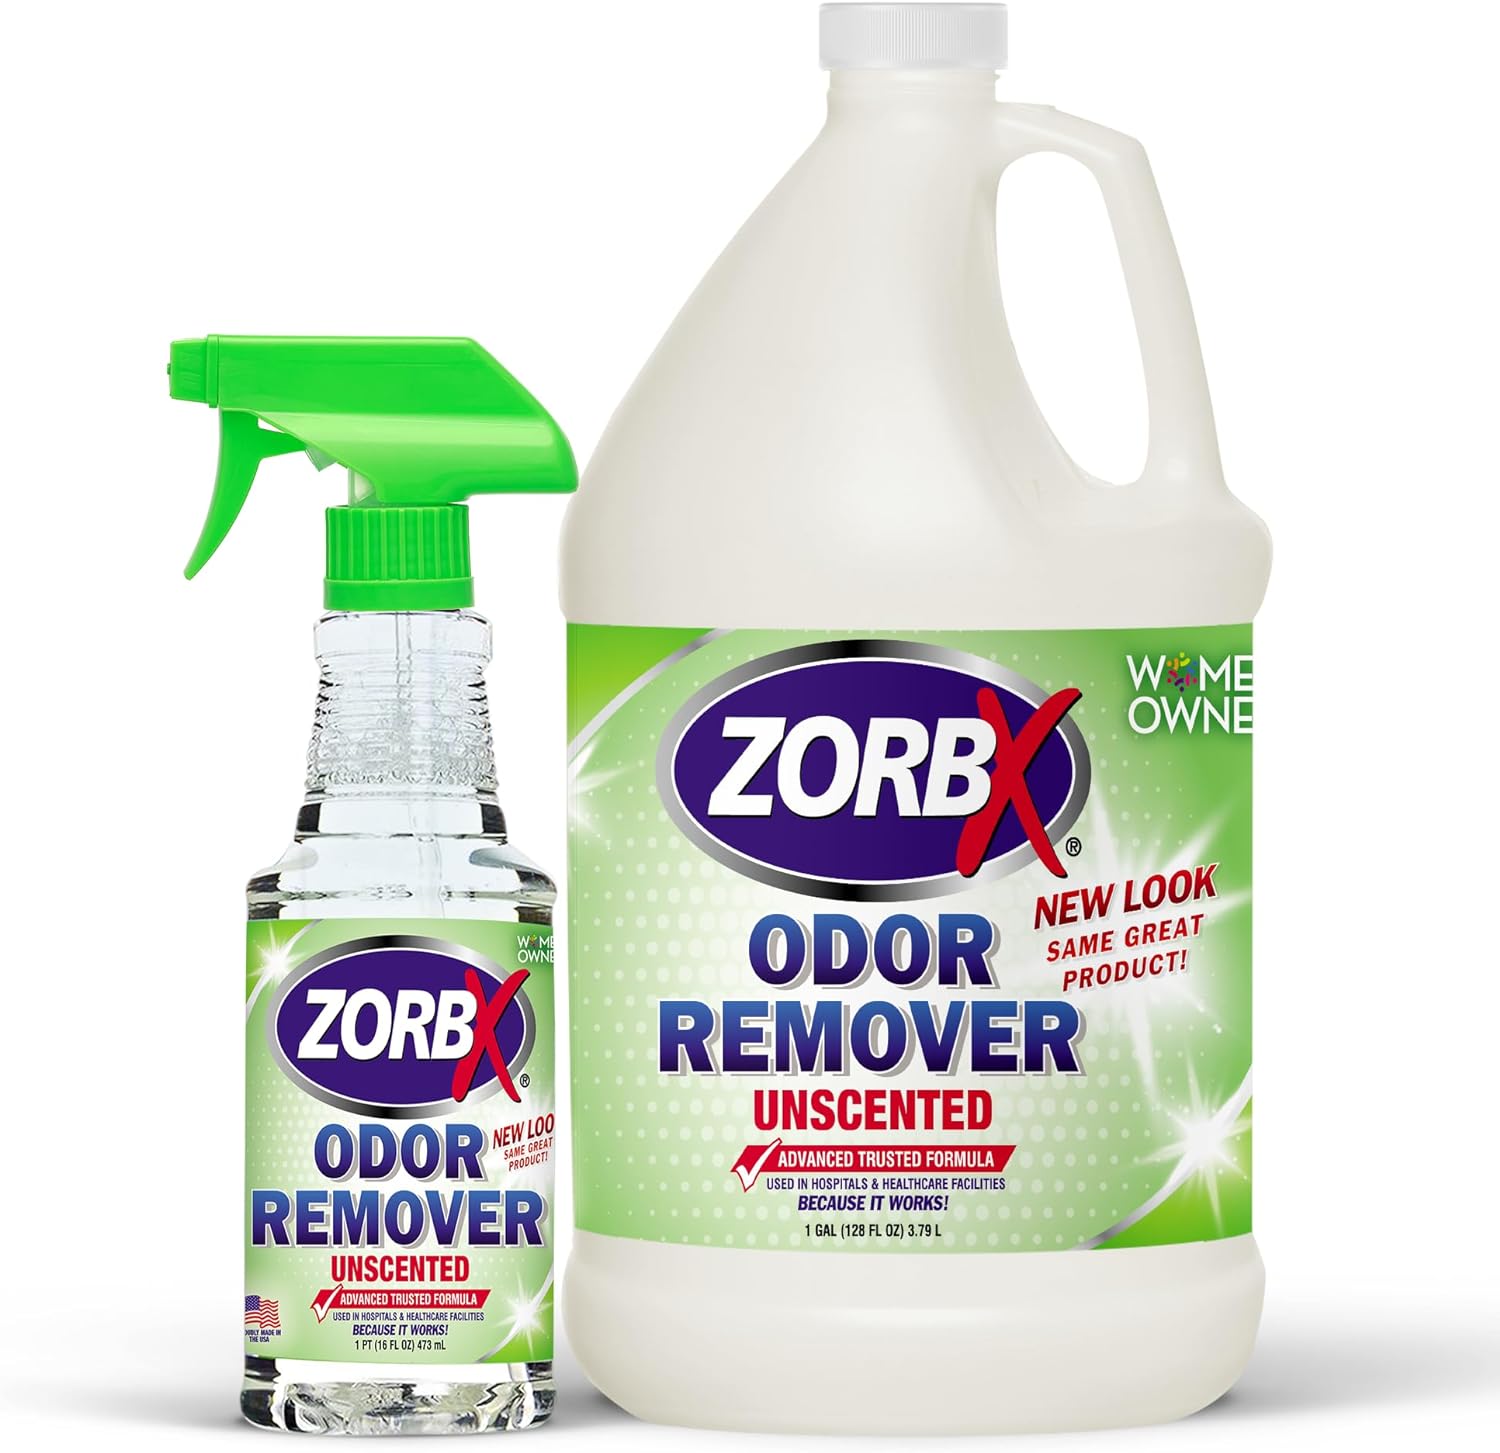 ZORBX Unscented Multipurpose Odor Eliminator Combo Pack - Used in Hospitals & Healthcare Facilities | Advanced Trusted Formula, Fast-Acting Odor Remover Spray for Strong Odors (16 Oz + 128 Oz)